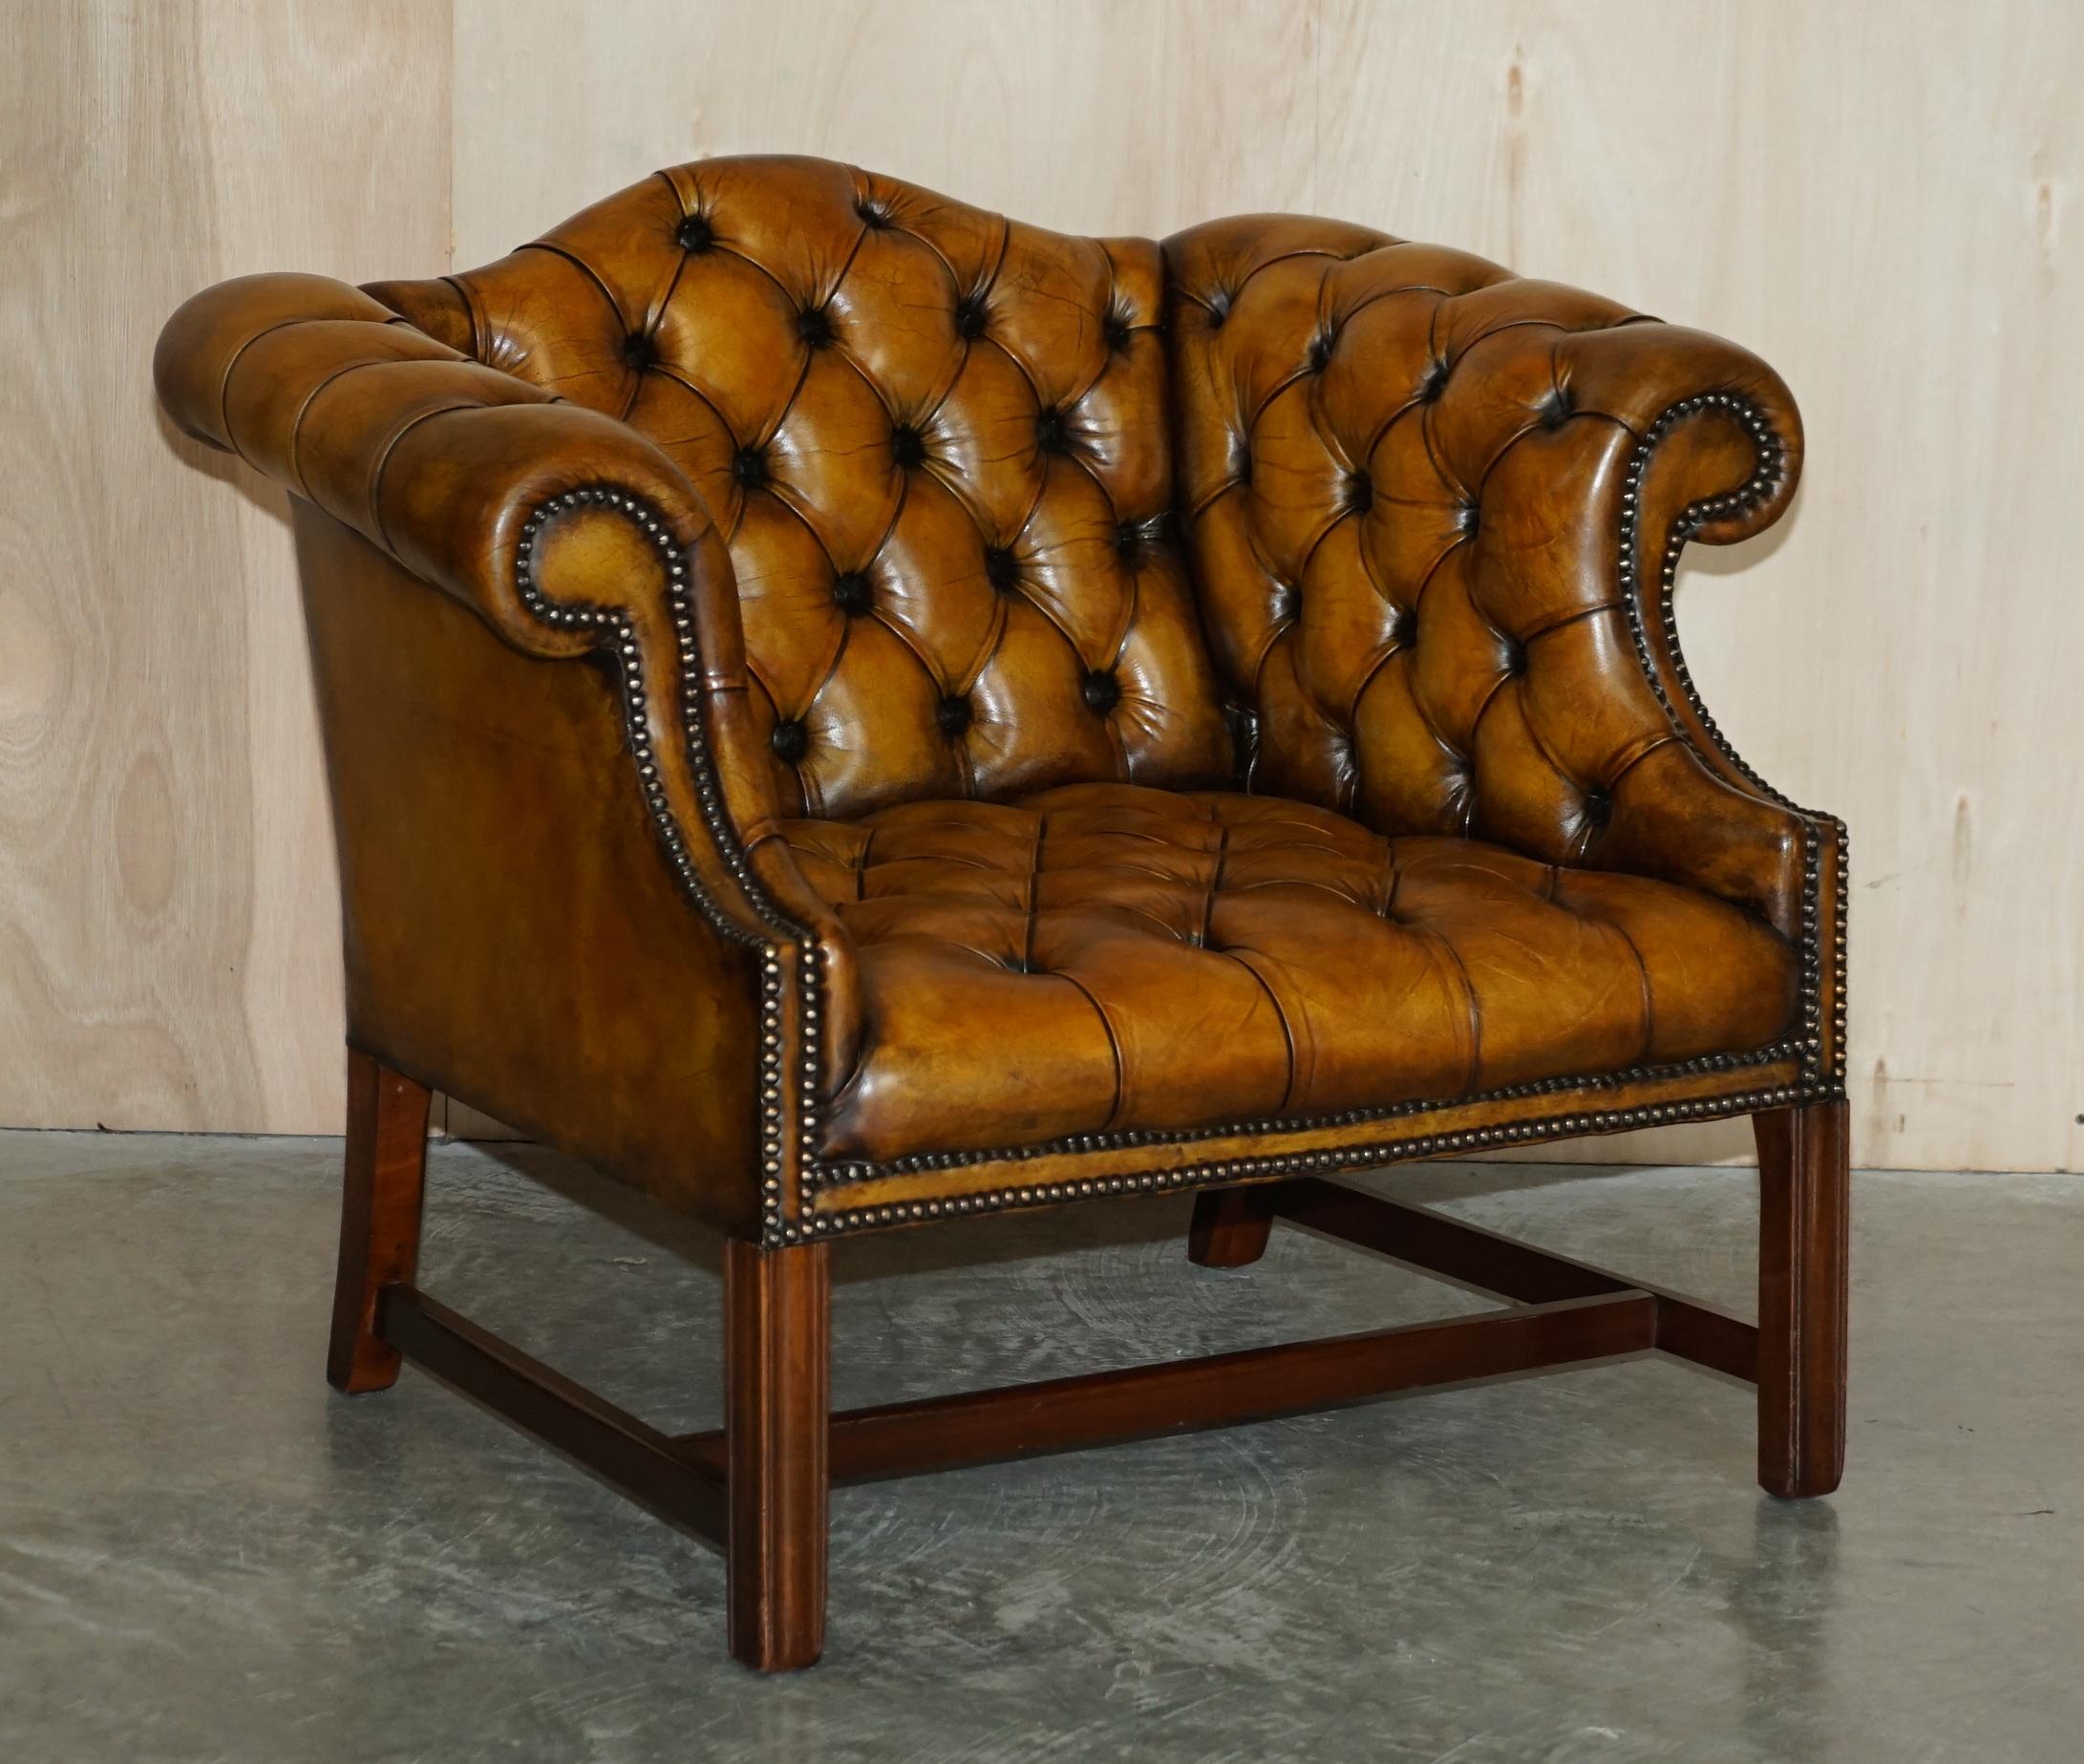 High Victorian Antique Restored Brown Leather Chesterfield Library Armchairs Sofa Stool Suite For Sale